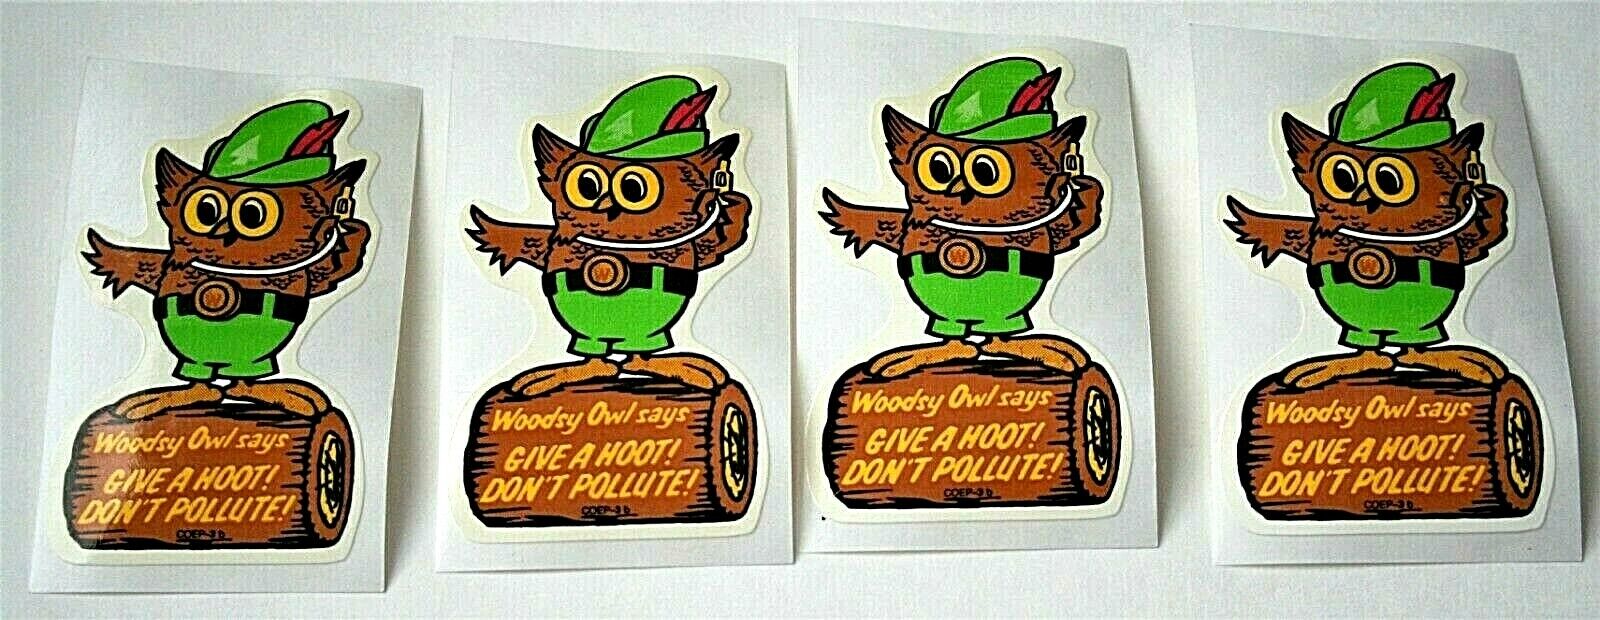 Set Of 4 Woodsy The Owl Give A Hoot Don\'t Pollute 1990s Stickers New NOS